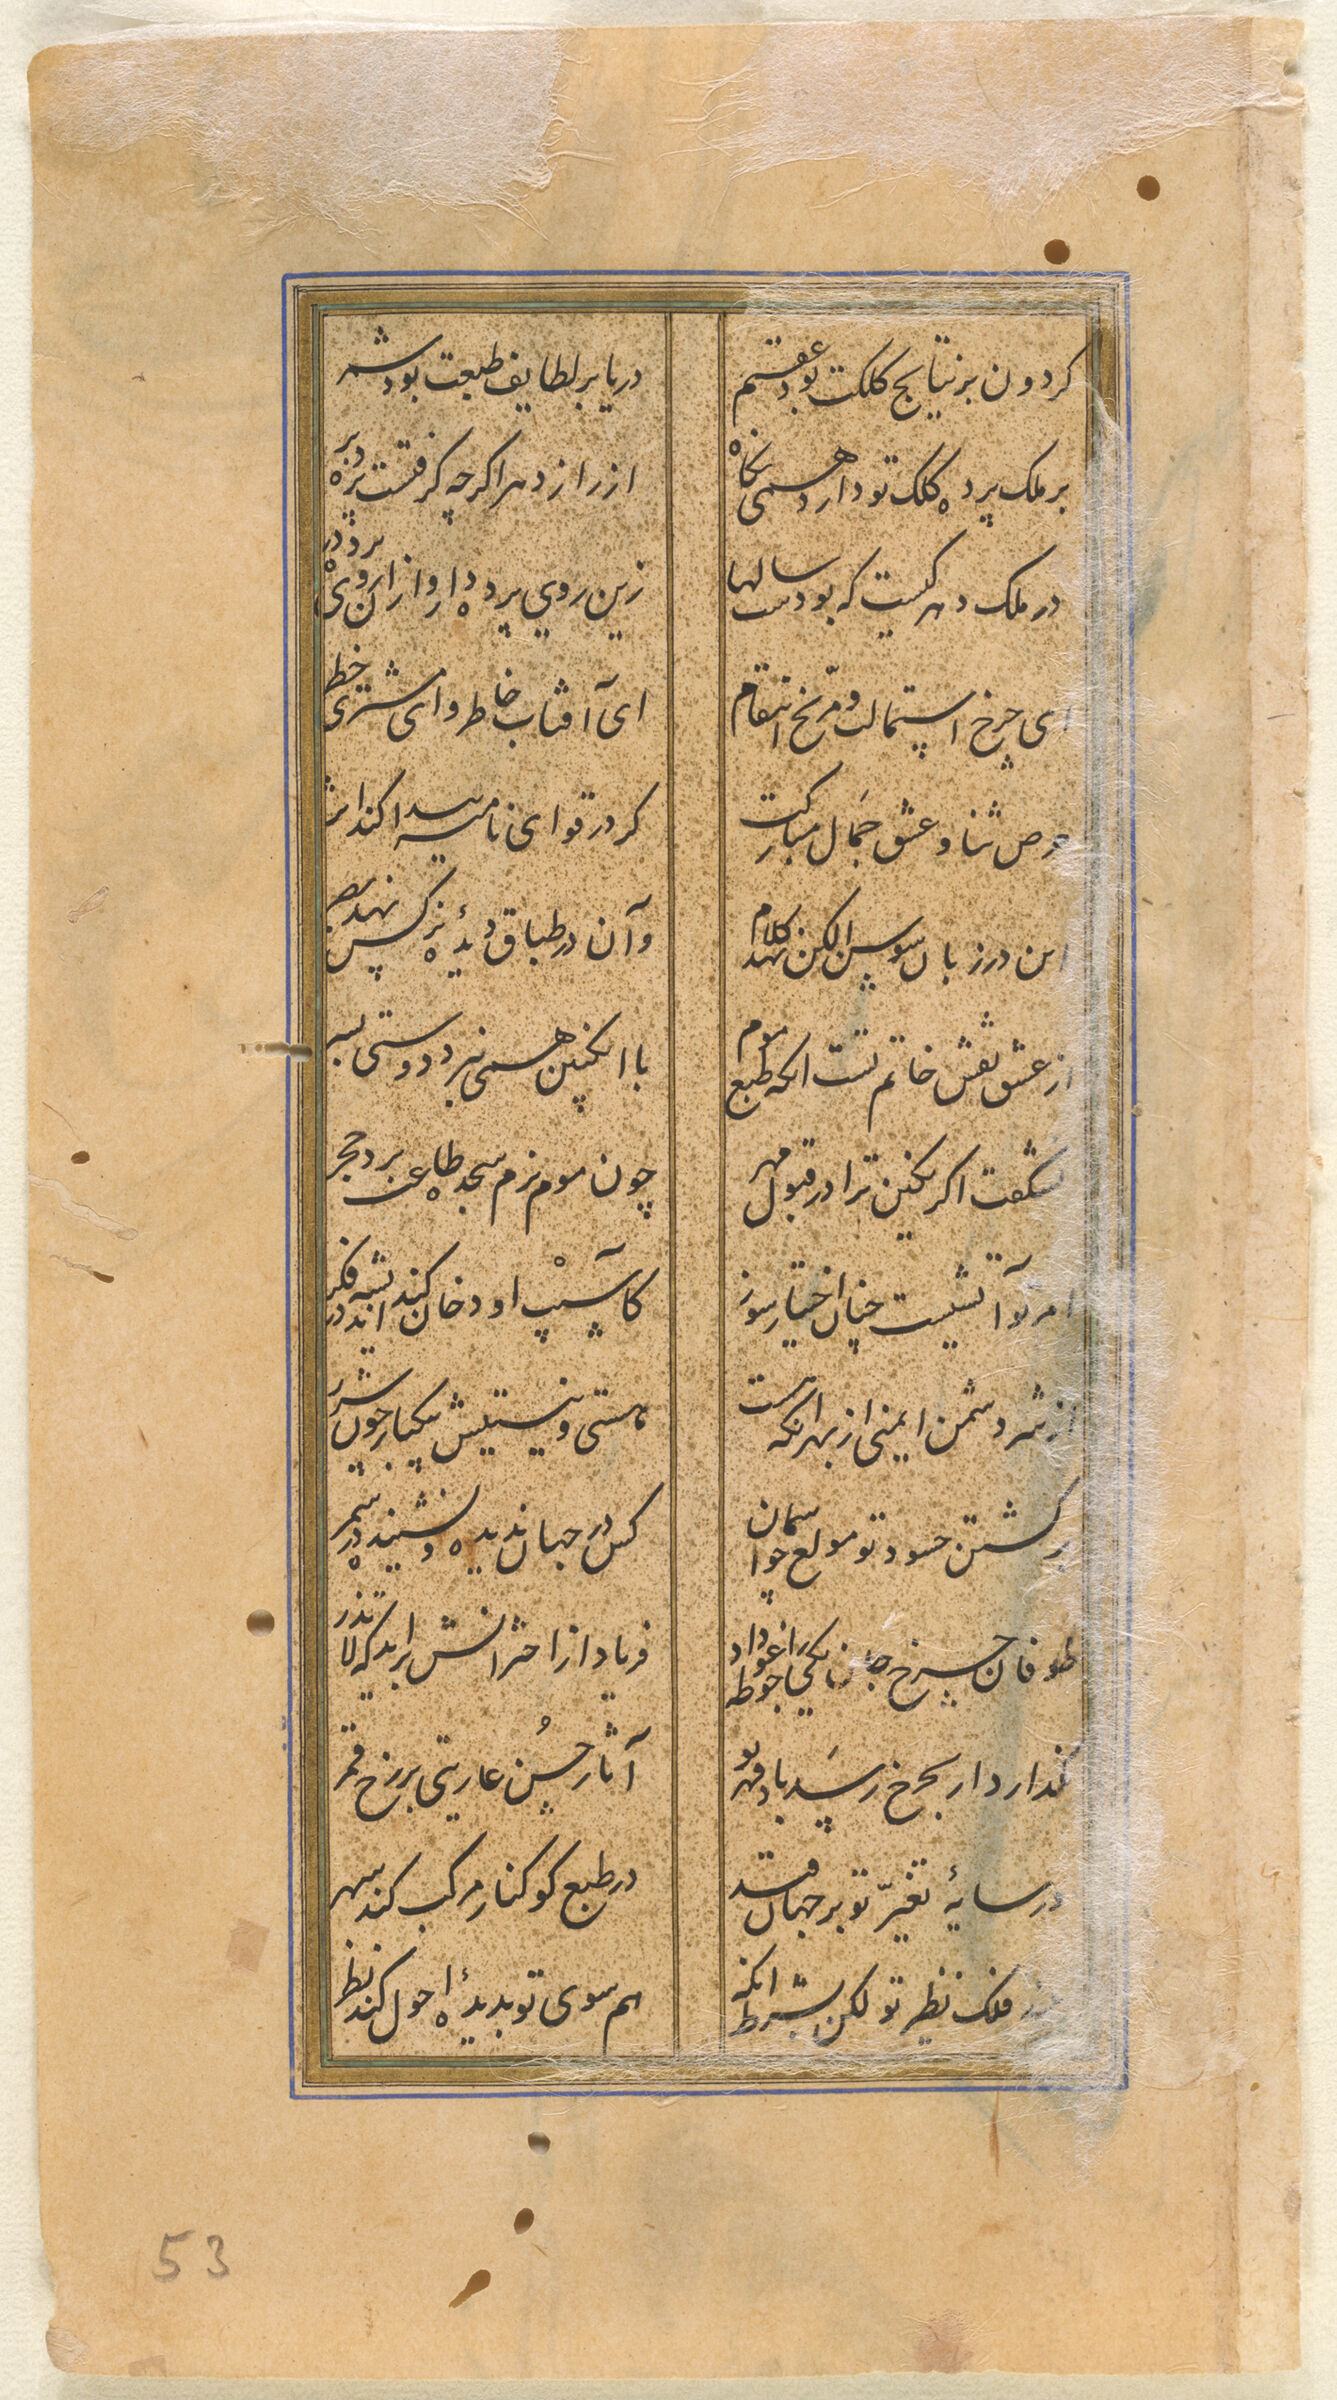 Folio 53 (Text, Recto And Verso), From A Manuscript Of The Divan (Collection Of Works) Of Anvari